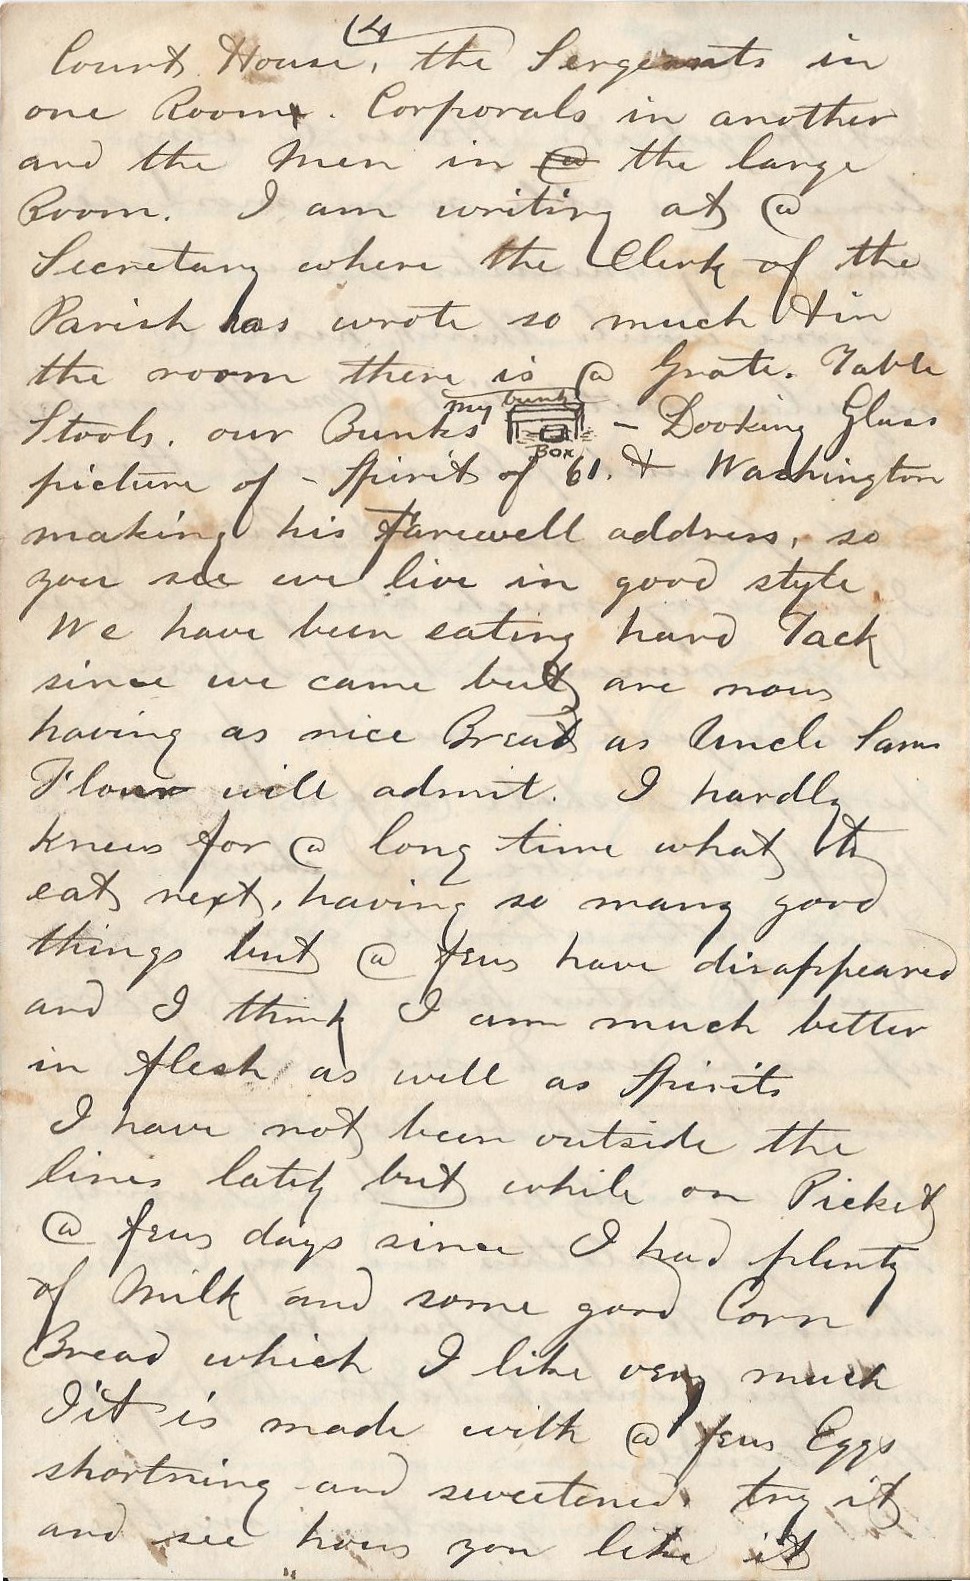 Nov 22, 1863 letter from George Henry Moulton to his mother, page 4